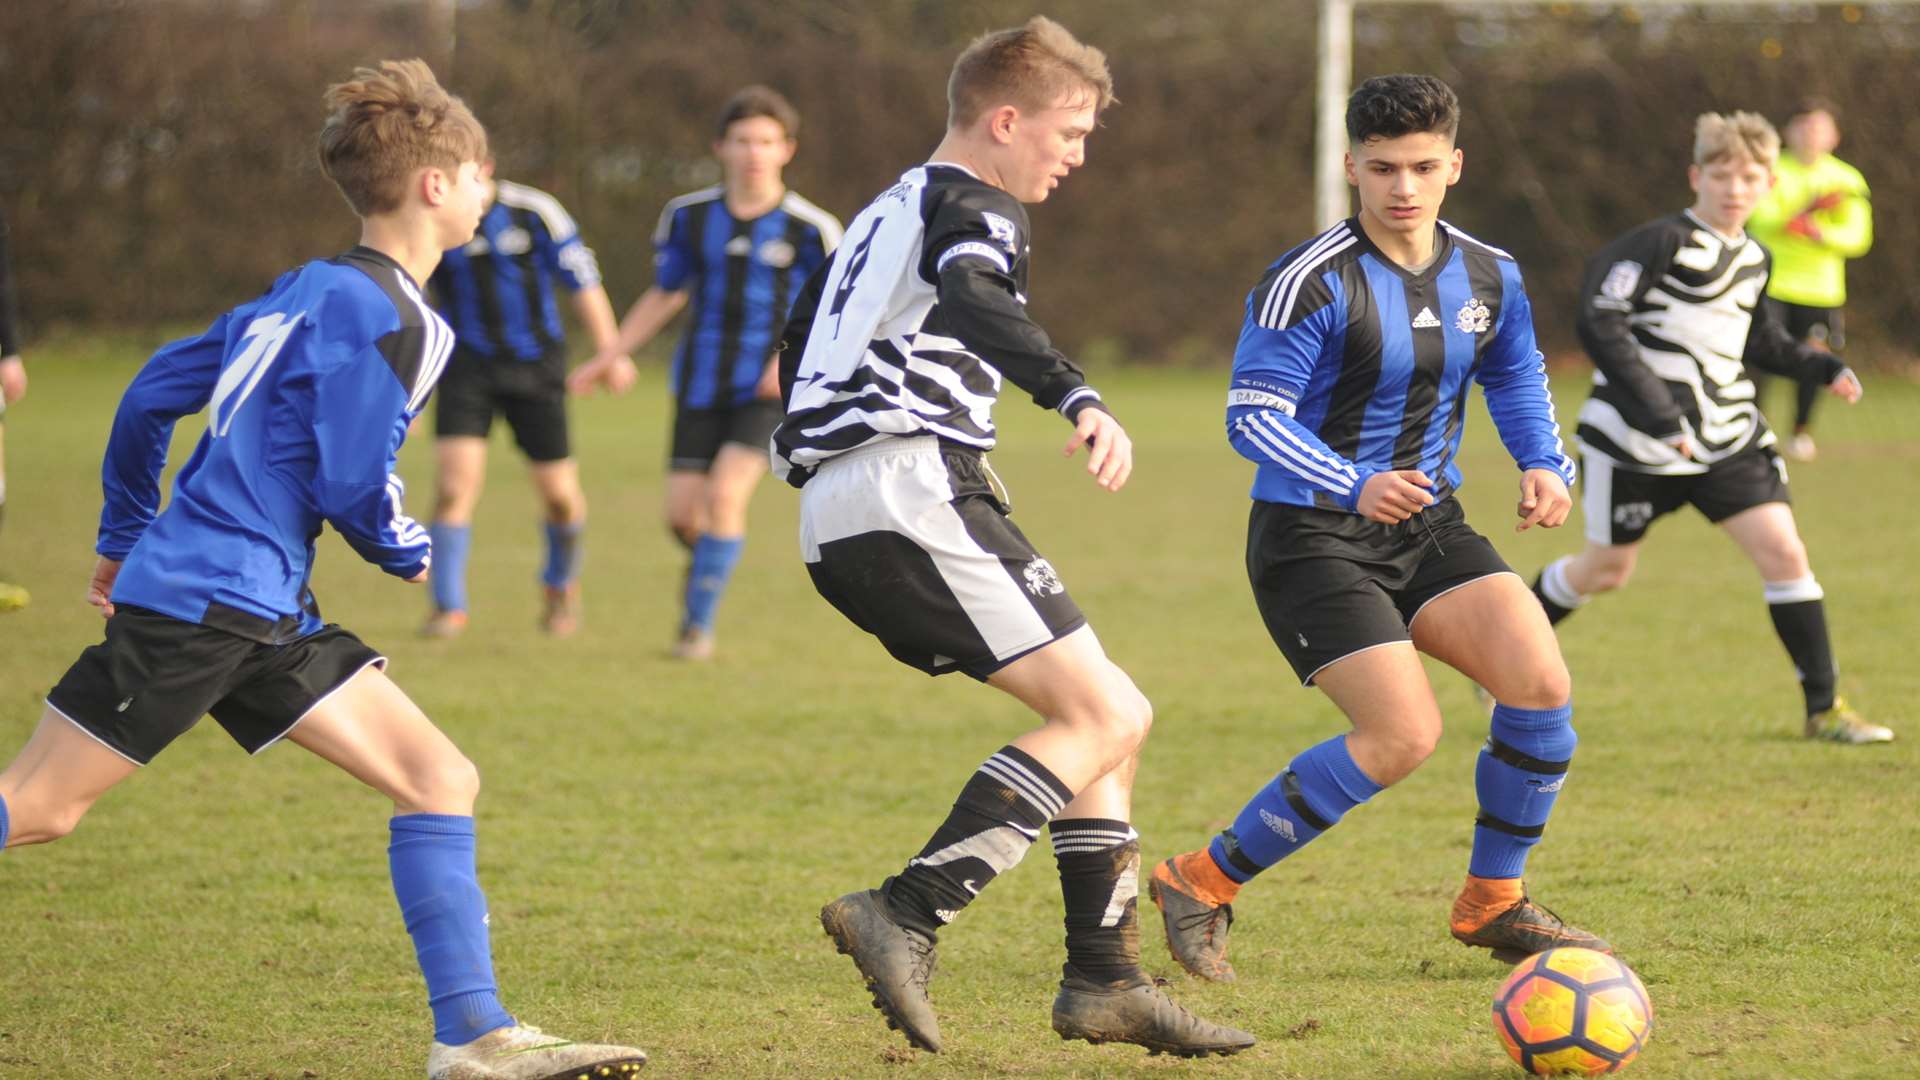 Milton & Fulston United (centre) up against Omega 92 in Under-16 Division 2 Picture: Steve Crispe